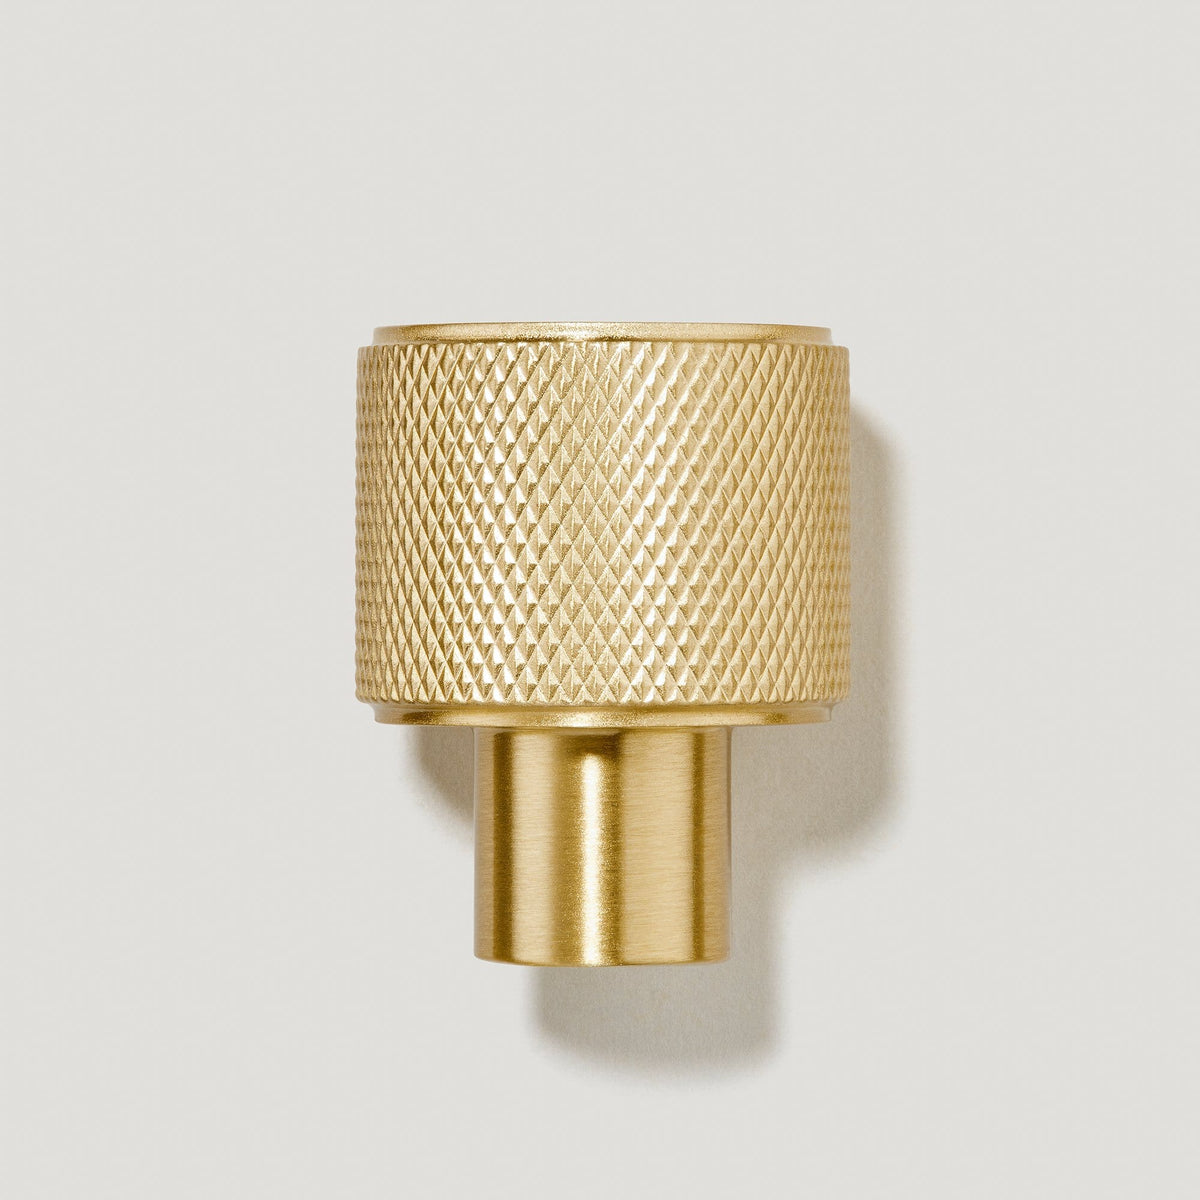 Nicolo Knurled Polished Unlacquered Brass Wall Hook + Reviews